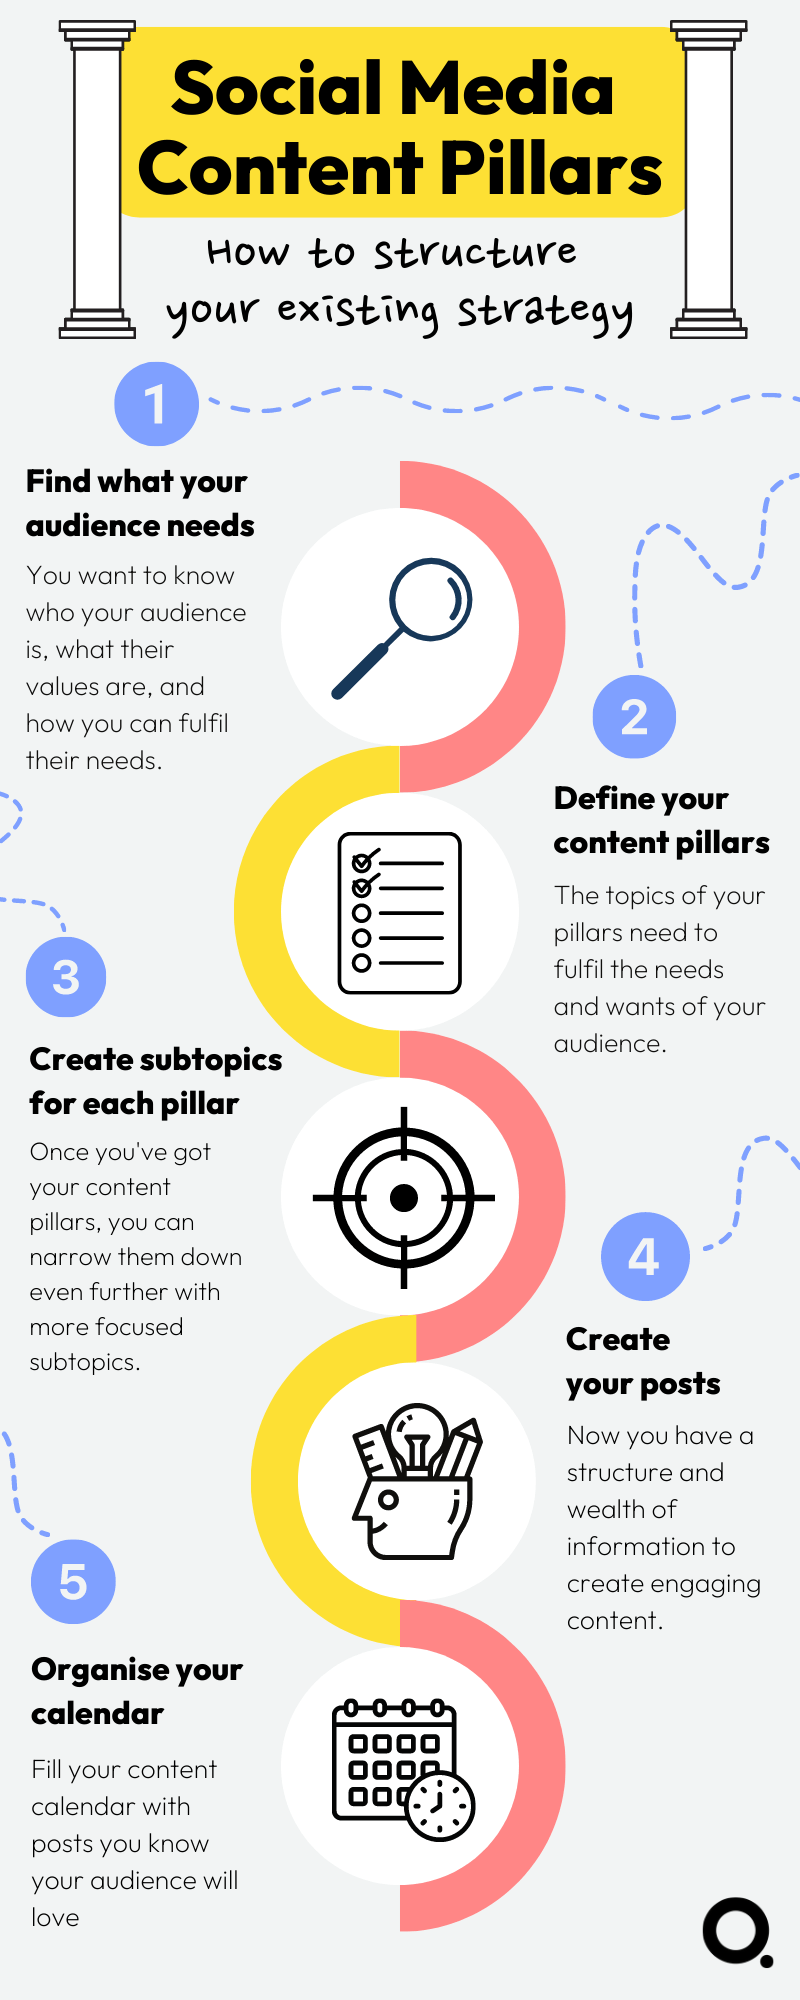 Social media content pillars infographic showing 5 steps to structure your strategy. Find your audience needs, define your pillars, create subtopics, create posts and organize calendar.